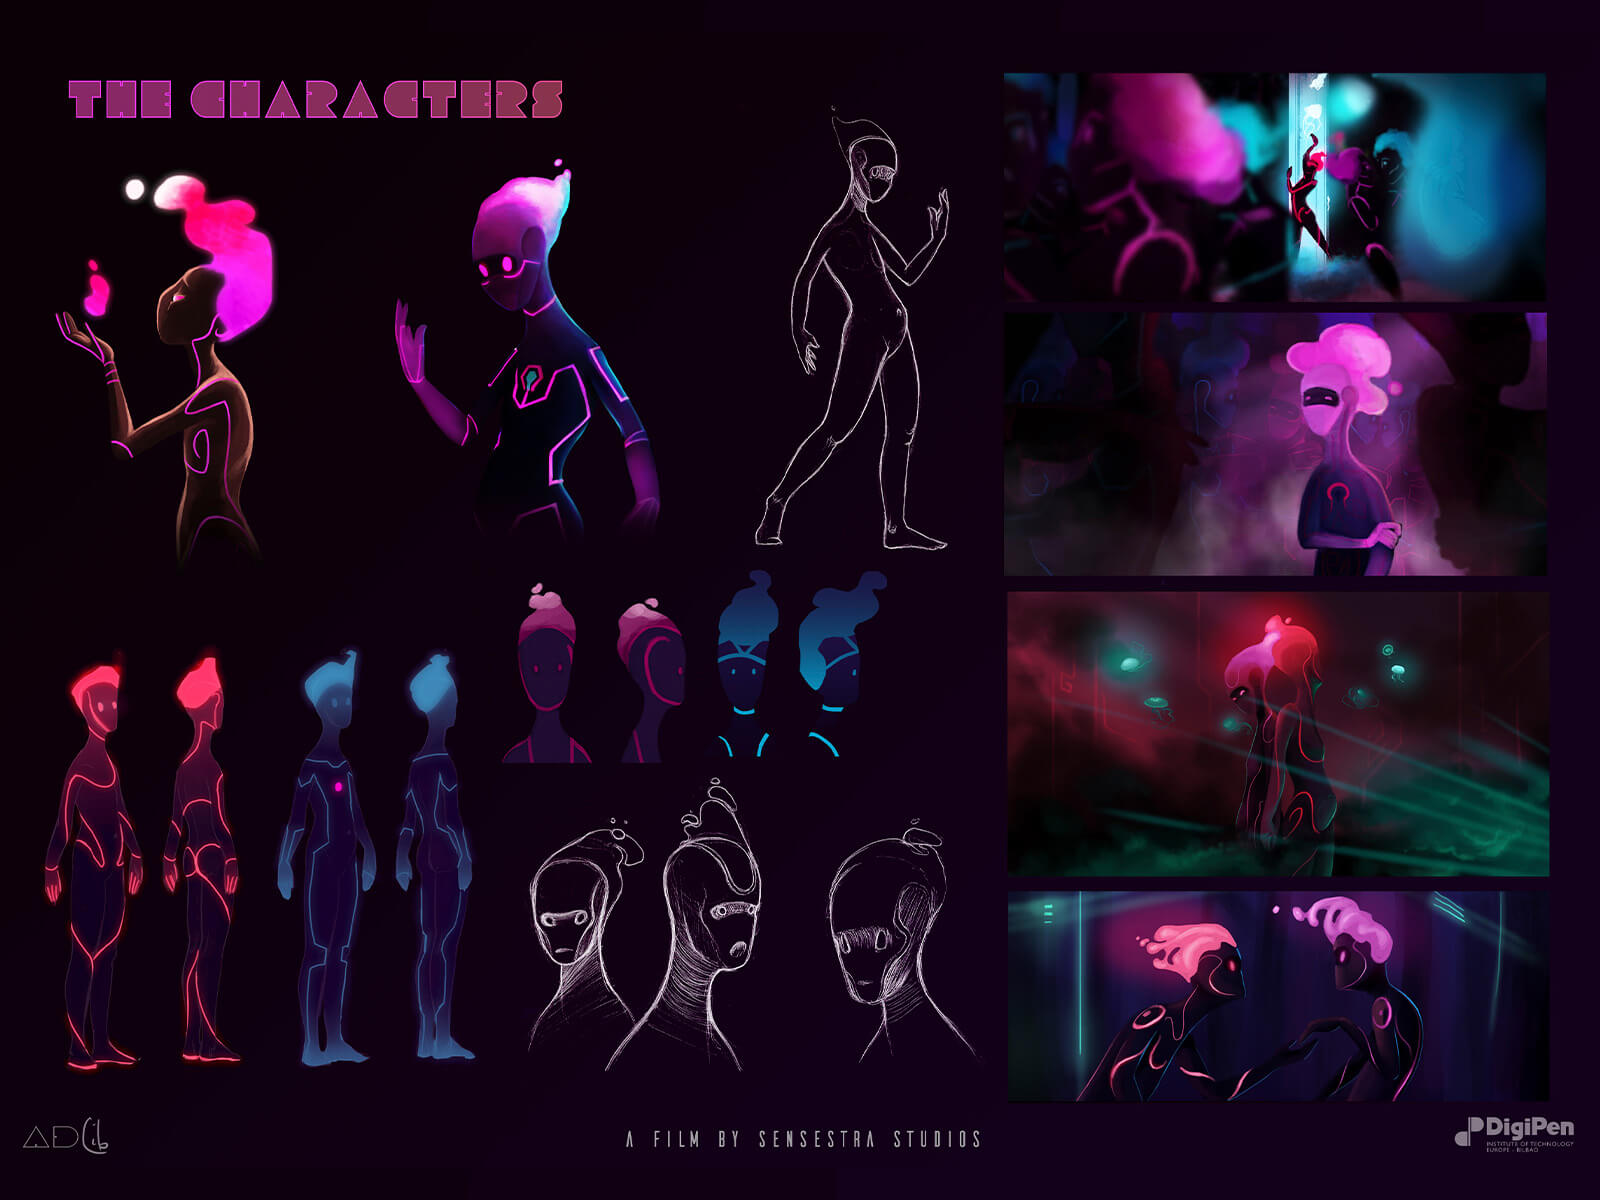 Sketches of neon-colored futuristic characters